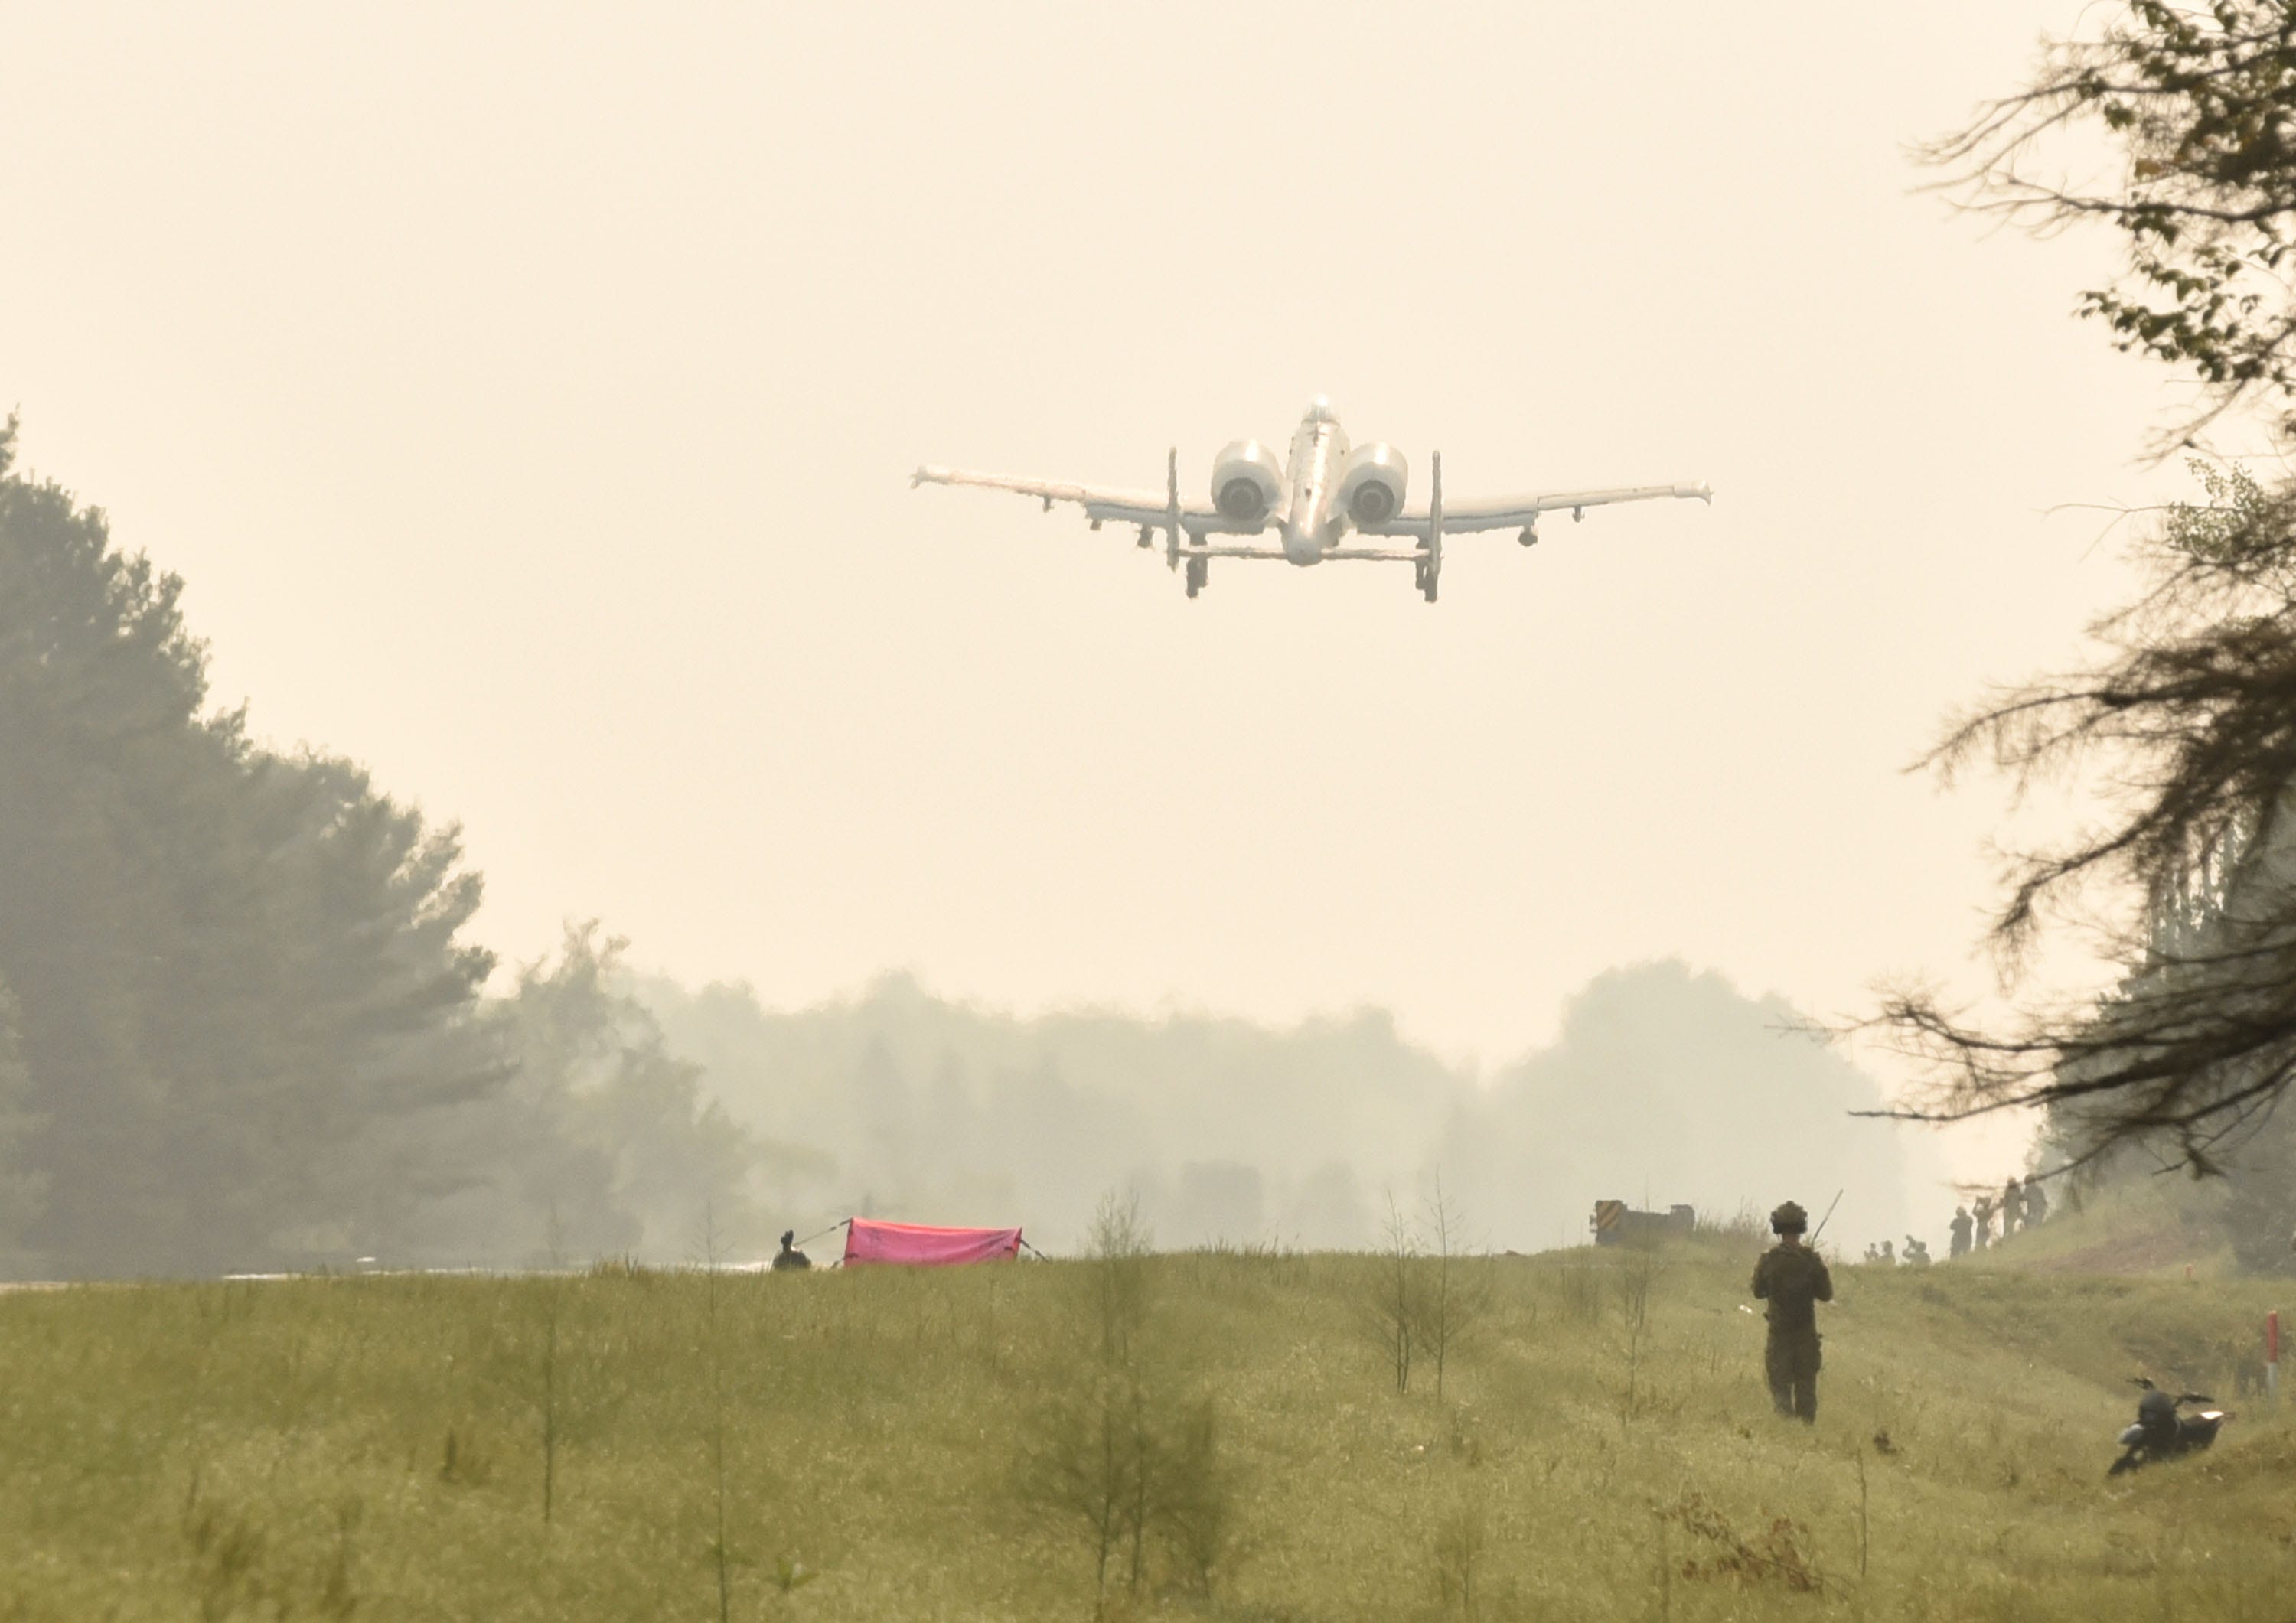 An A-10 jet takes off from highway M-32 west of Alpena Thursday, August 5, 2021, aprt of a training exercise durint the National Guard's Operation Northern Strike. Two A-10's and two C-146 aircraft practiced landing on the highway.